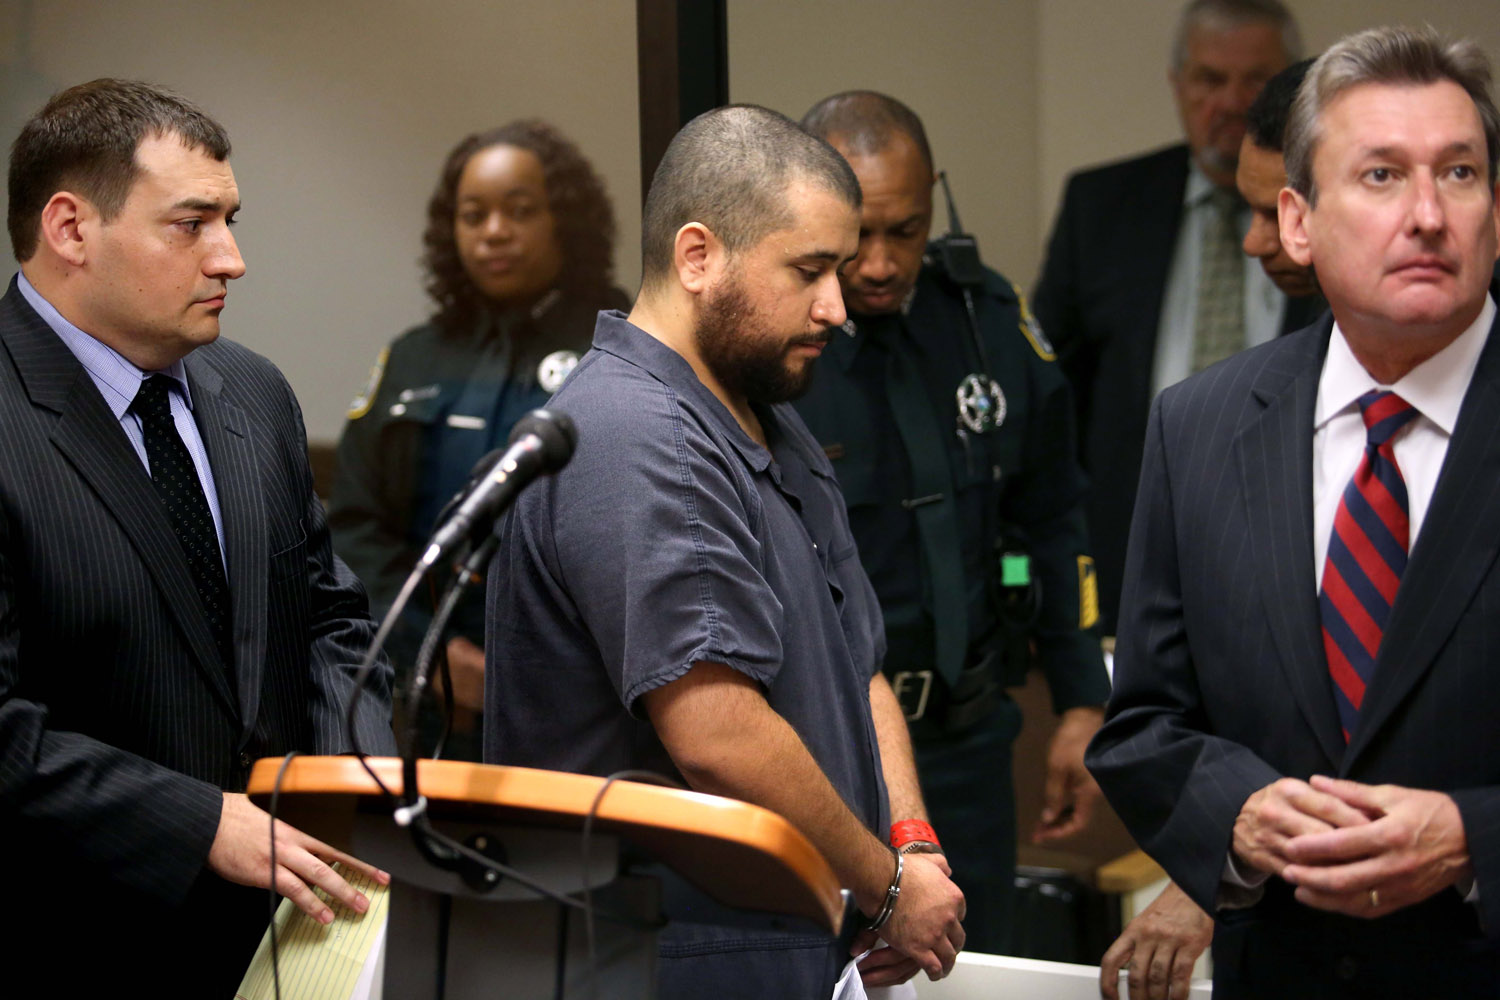 Nov. 19, 2013. George Zimmerman, the acquitted shooter in the death of Trayvon Martin, leaves Courtroom J2 with his defense counsel Daniel Megaro (left) and Jeff Dowdy after a first-appearance hearing on charges including aggravated assault stemming from a fight with his girlfriend in Sanford, Fla.